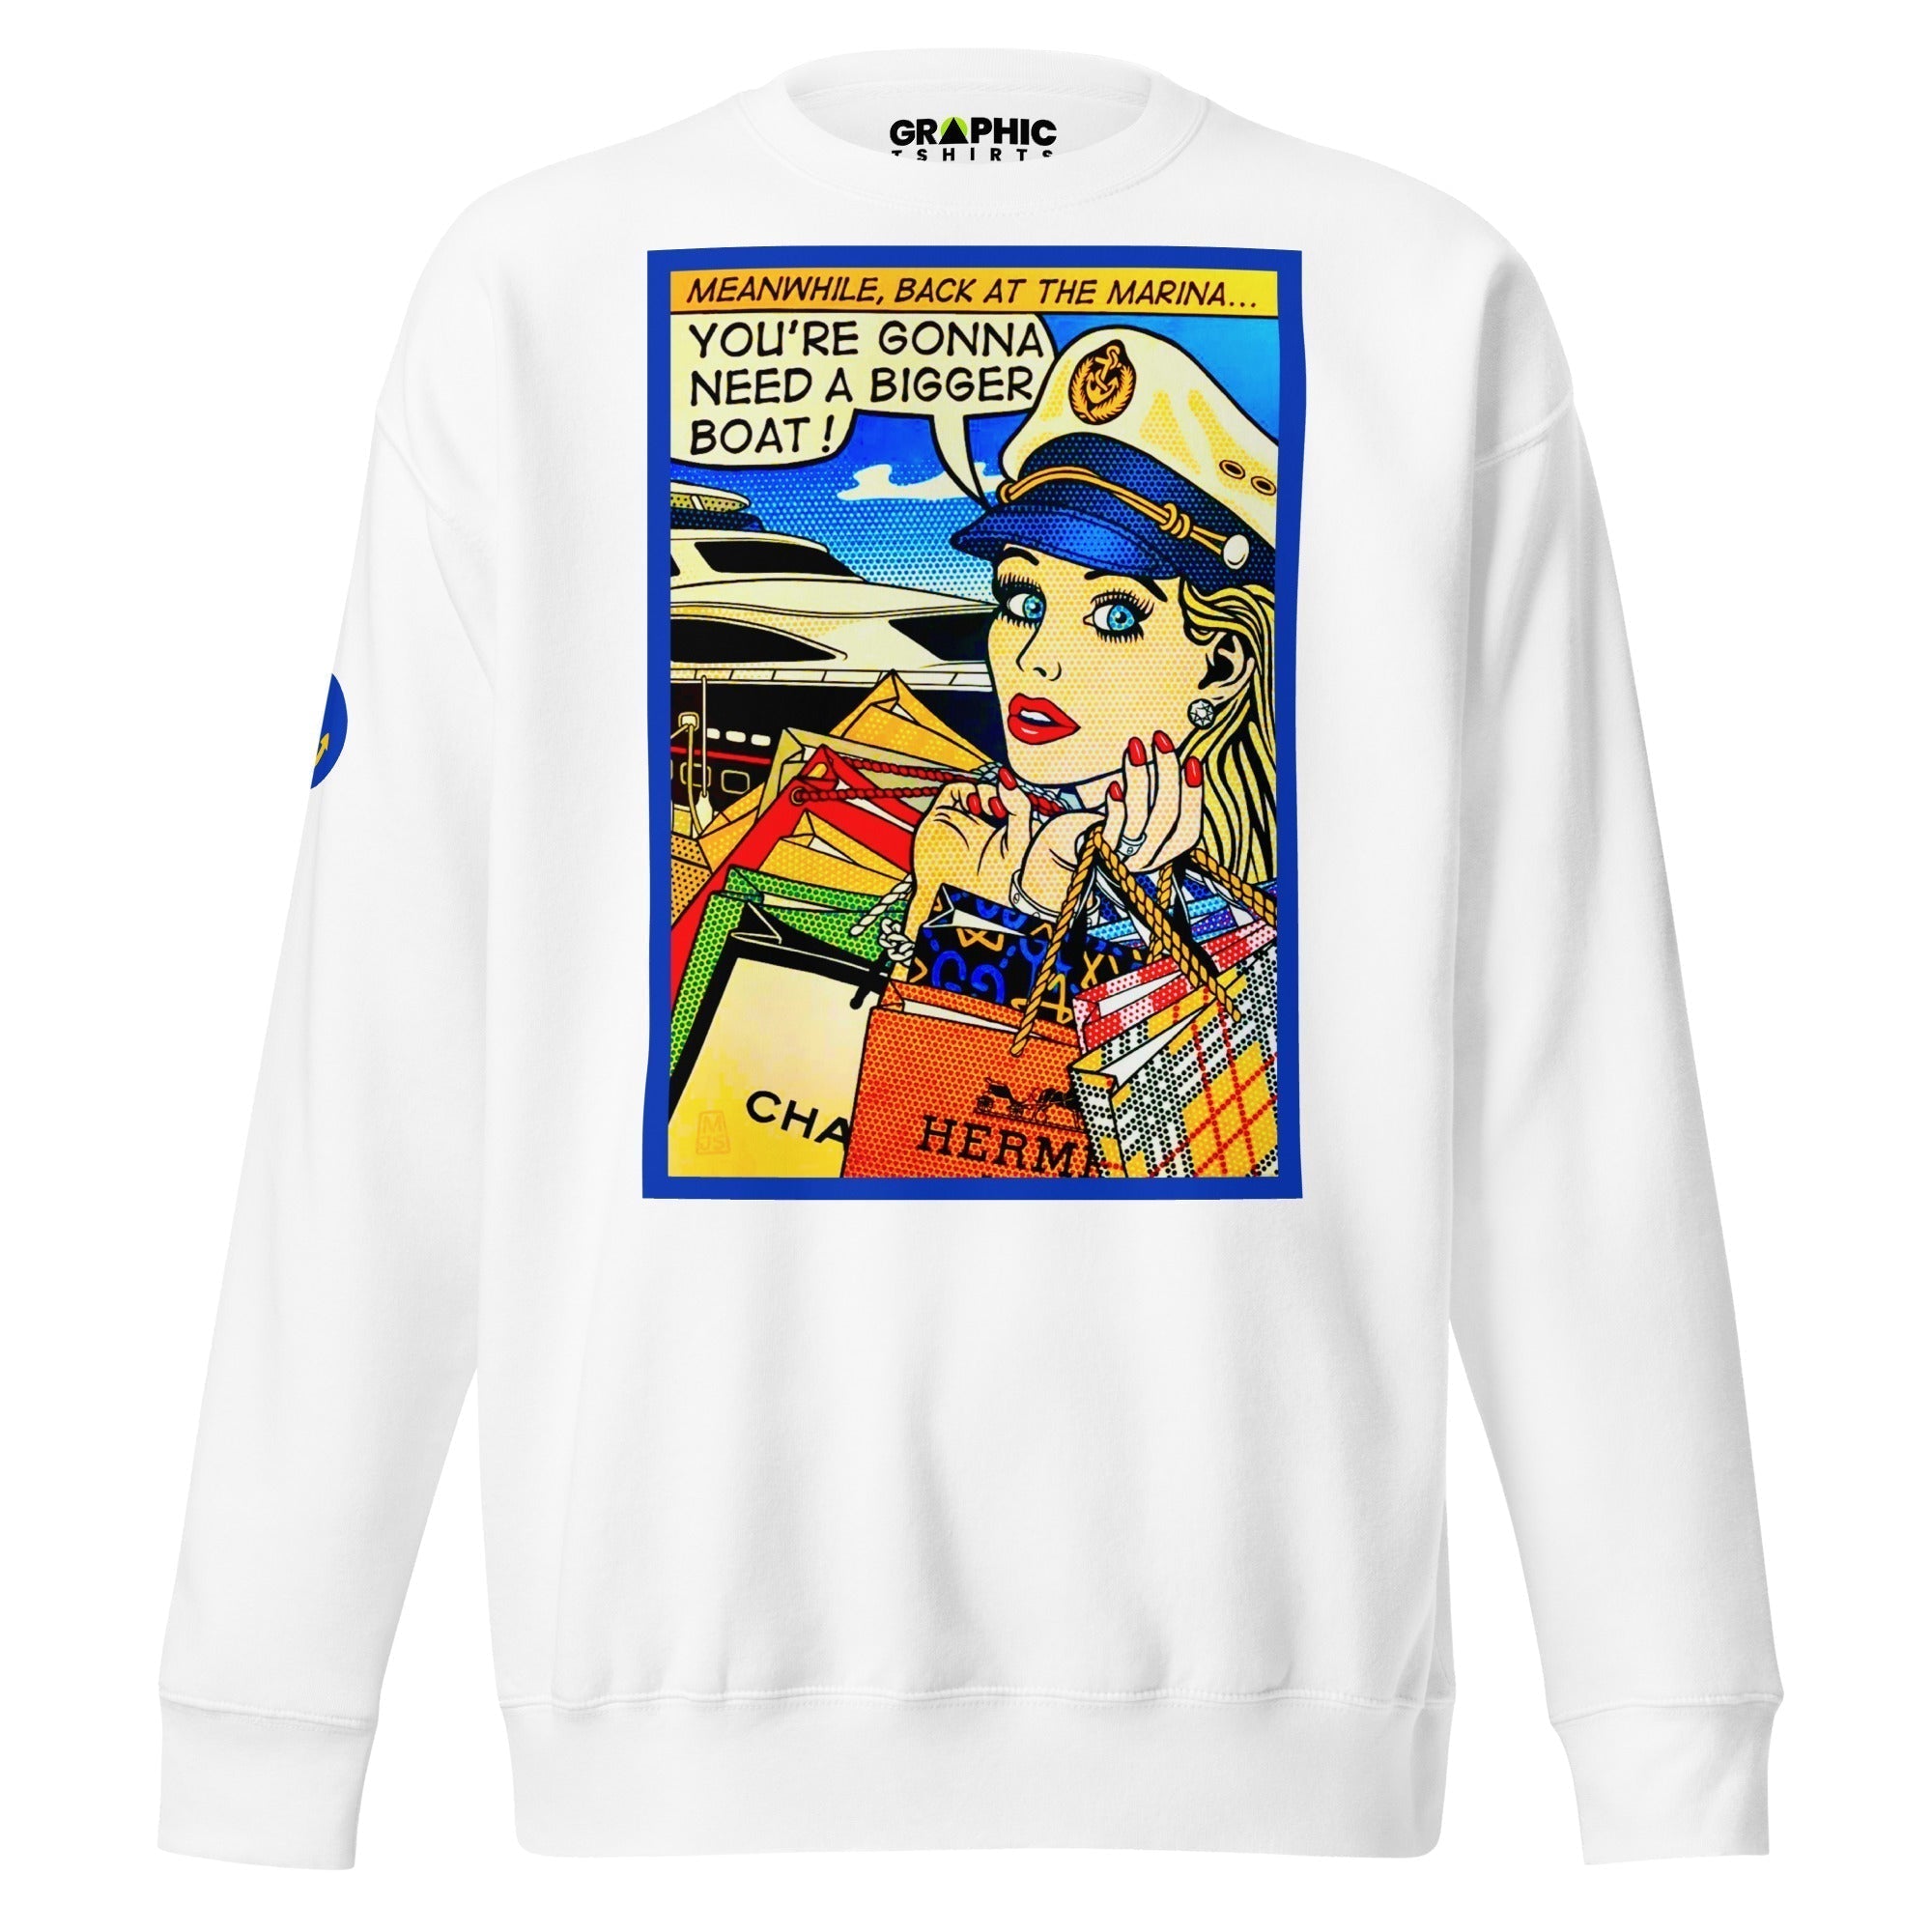 Unisex Premium Sweatshirt - Meanwhile Back At The Marina... You're Gonna Need A Bigger Boat! - GRAPHIC T-SHIRTS